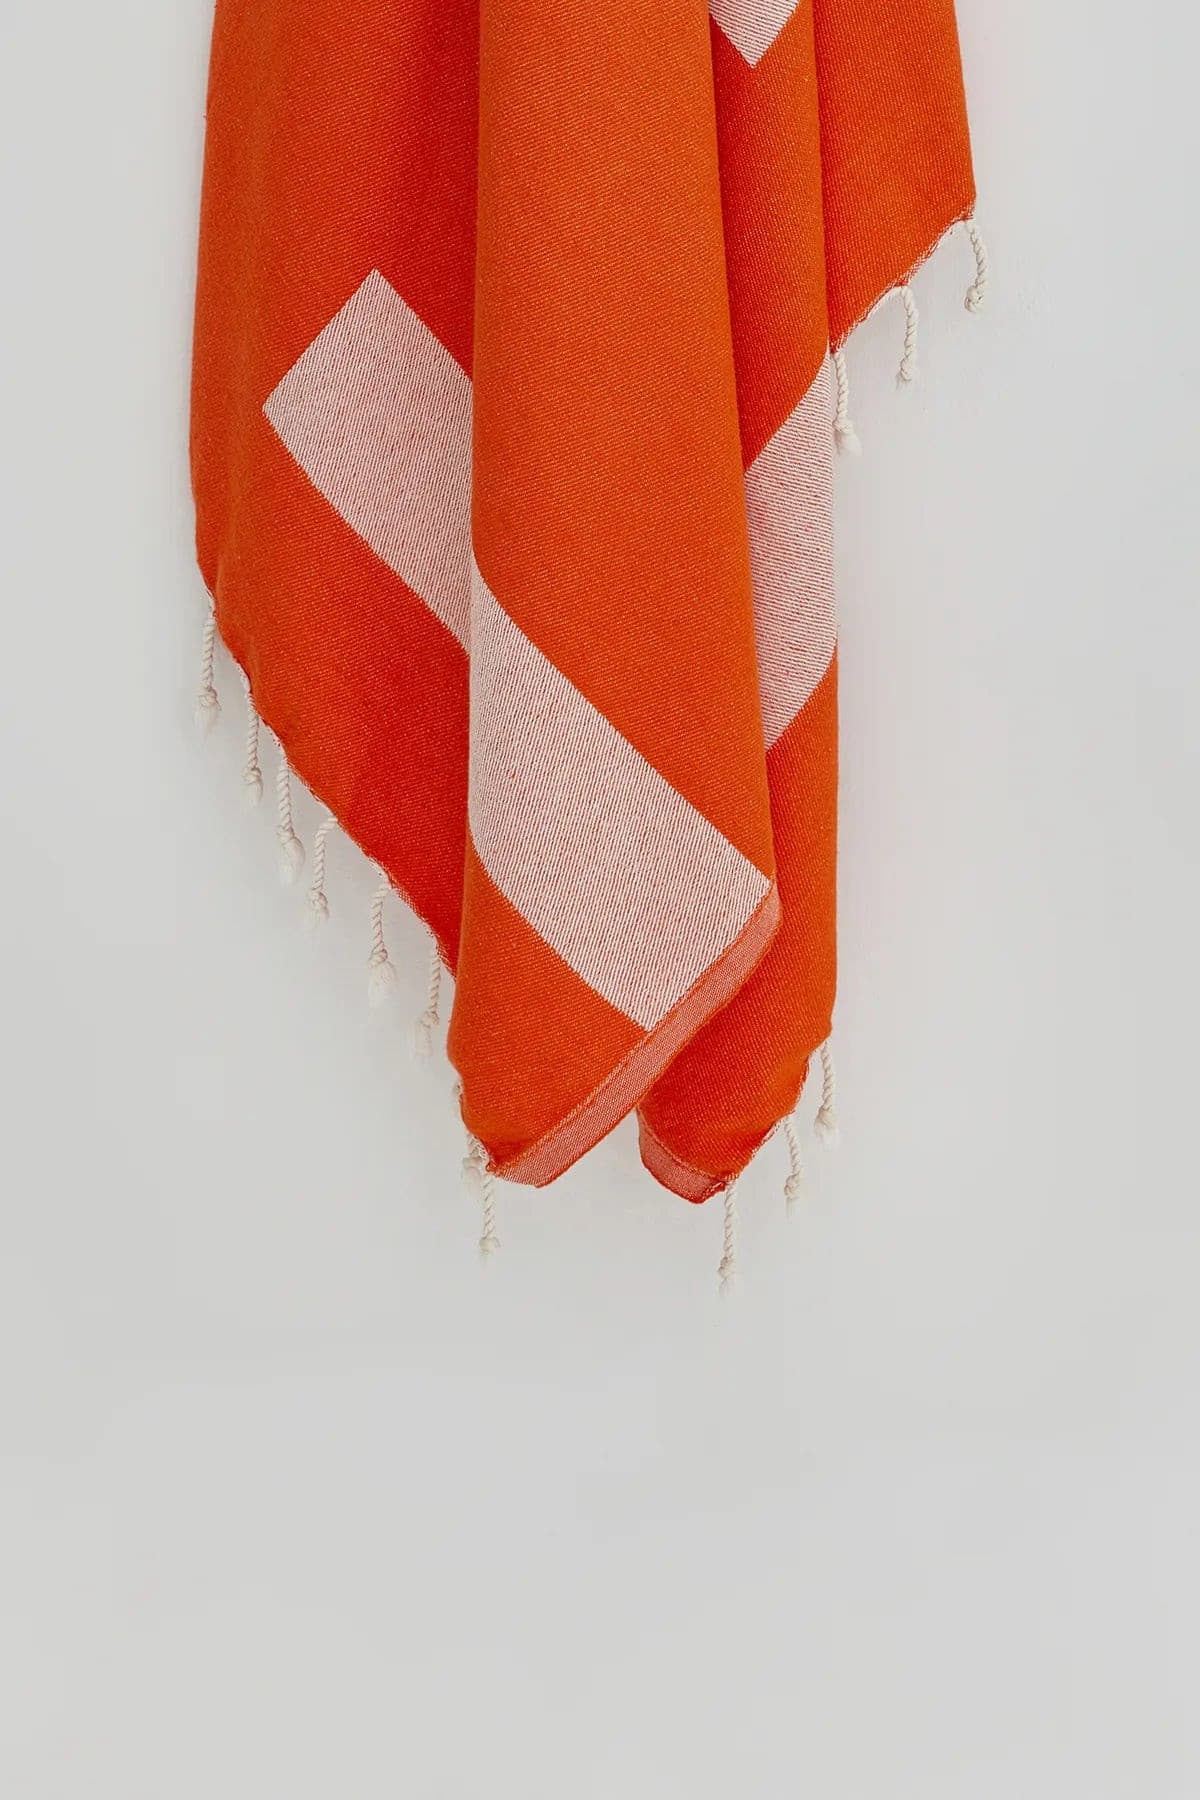 Beach/Bath,Sicilian Orange,Turkish towel,detailed,summer,line patterned,double-faces,purified sand,light,compact, easy pack,fun, recycled